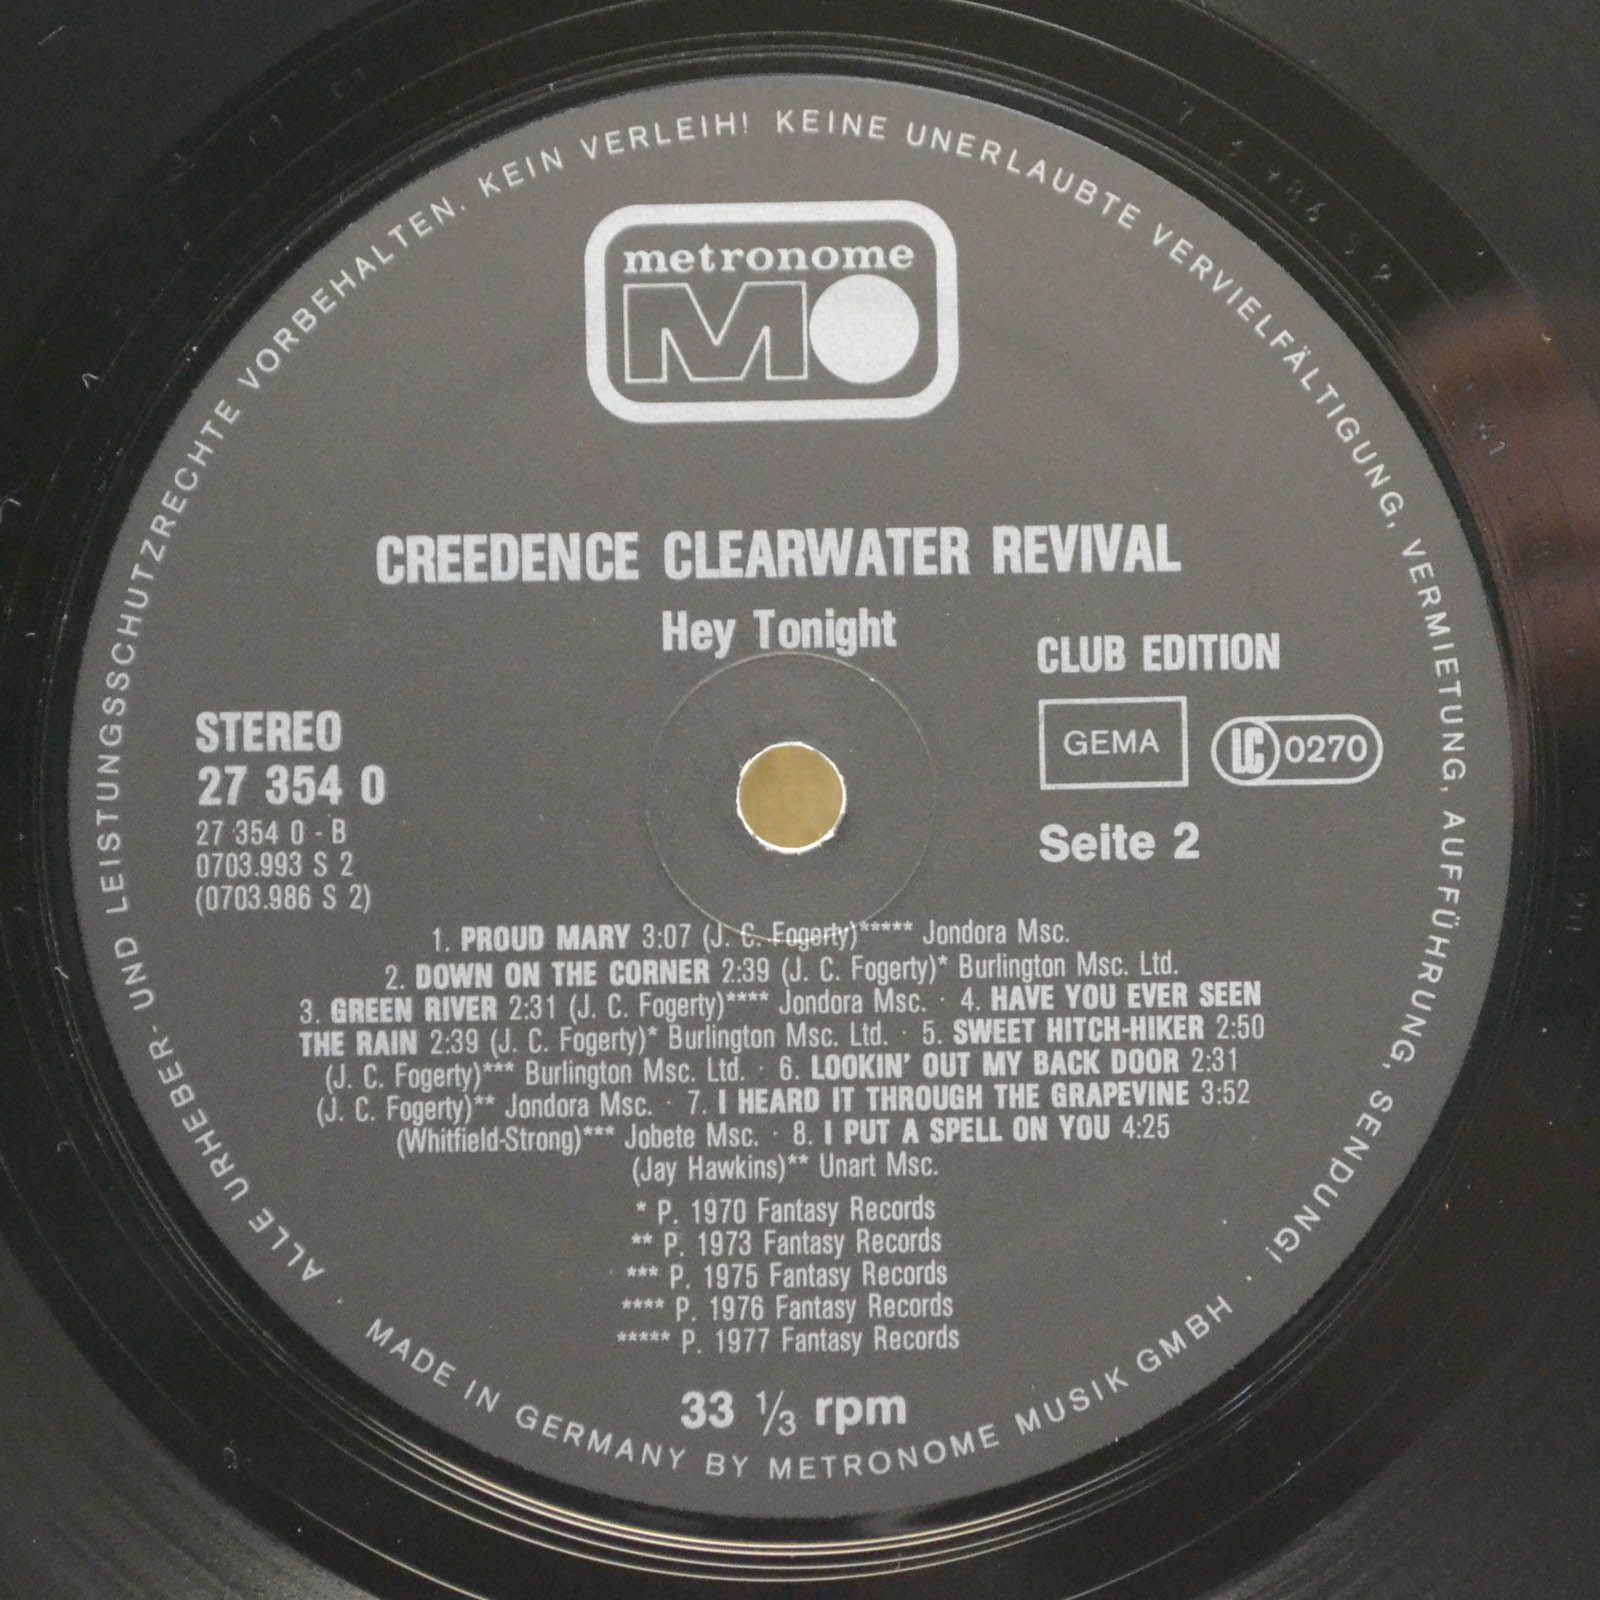 Creedence Clearwater Revival — Hey Tonight, 1981